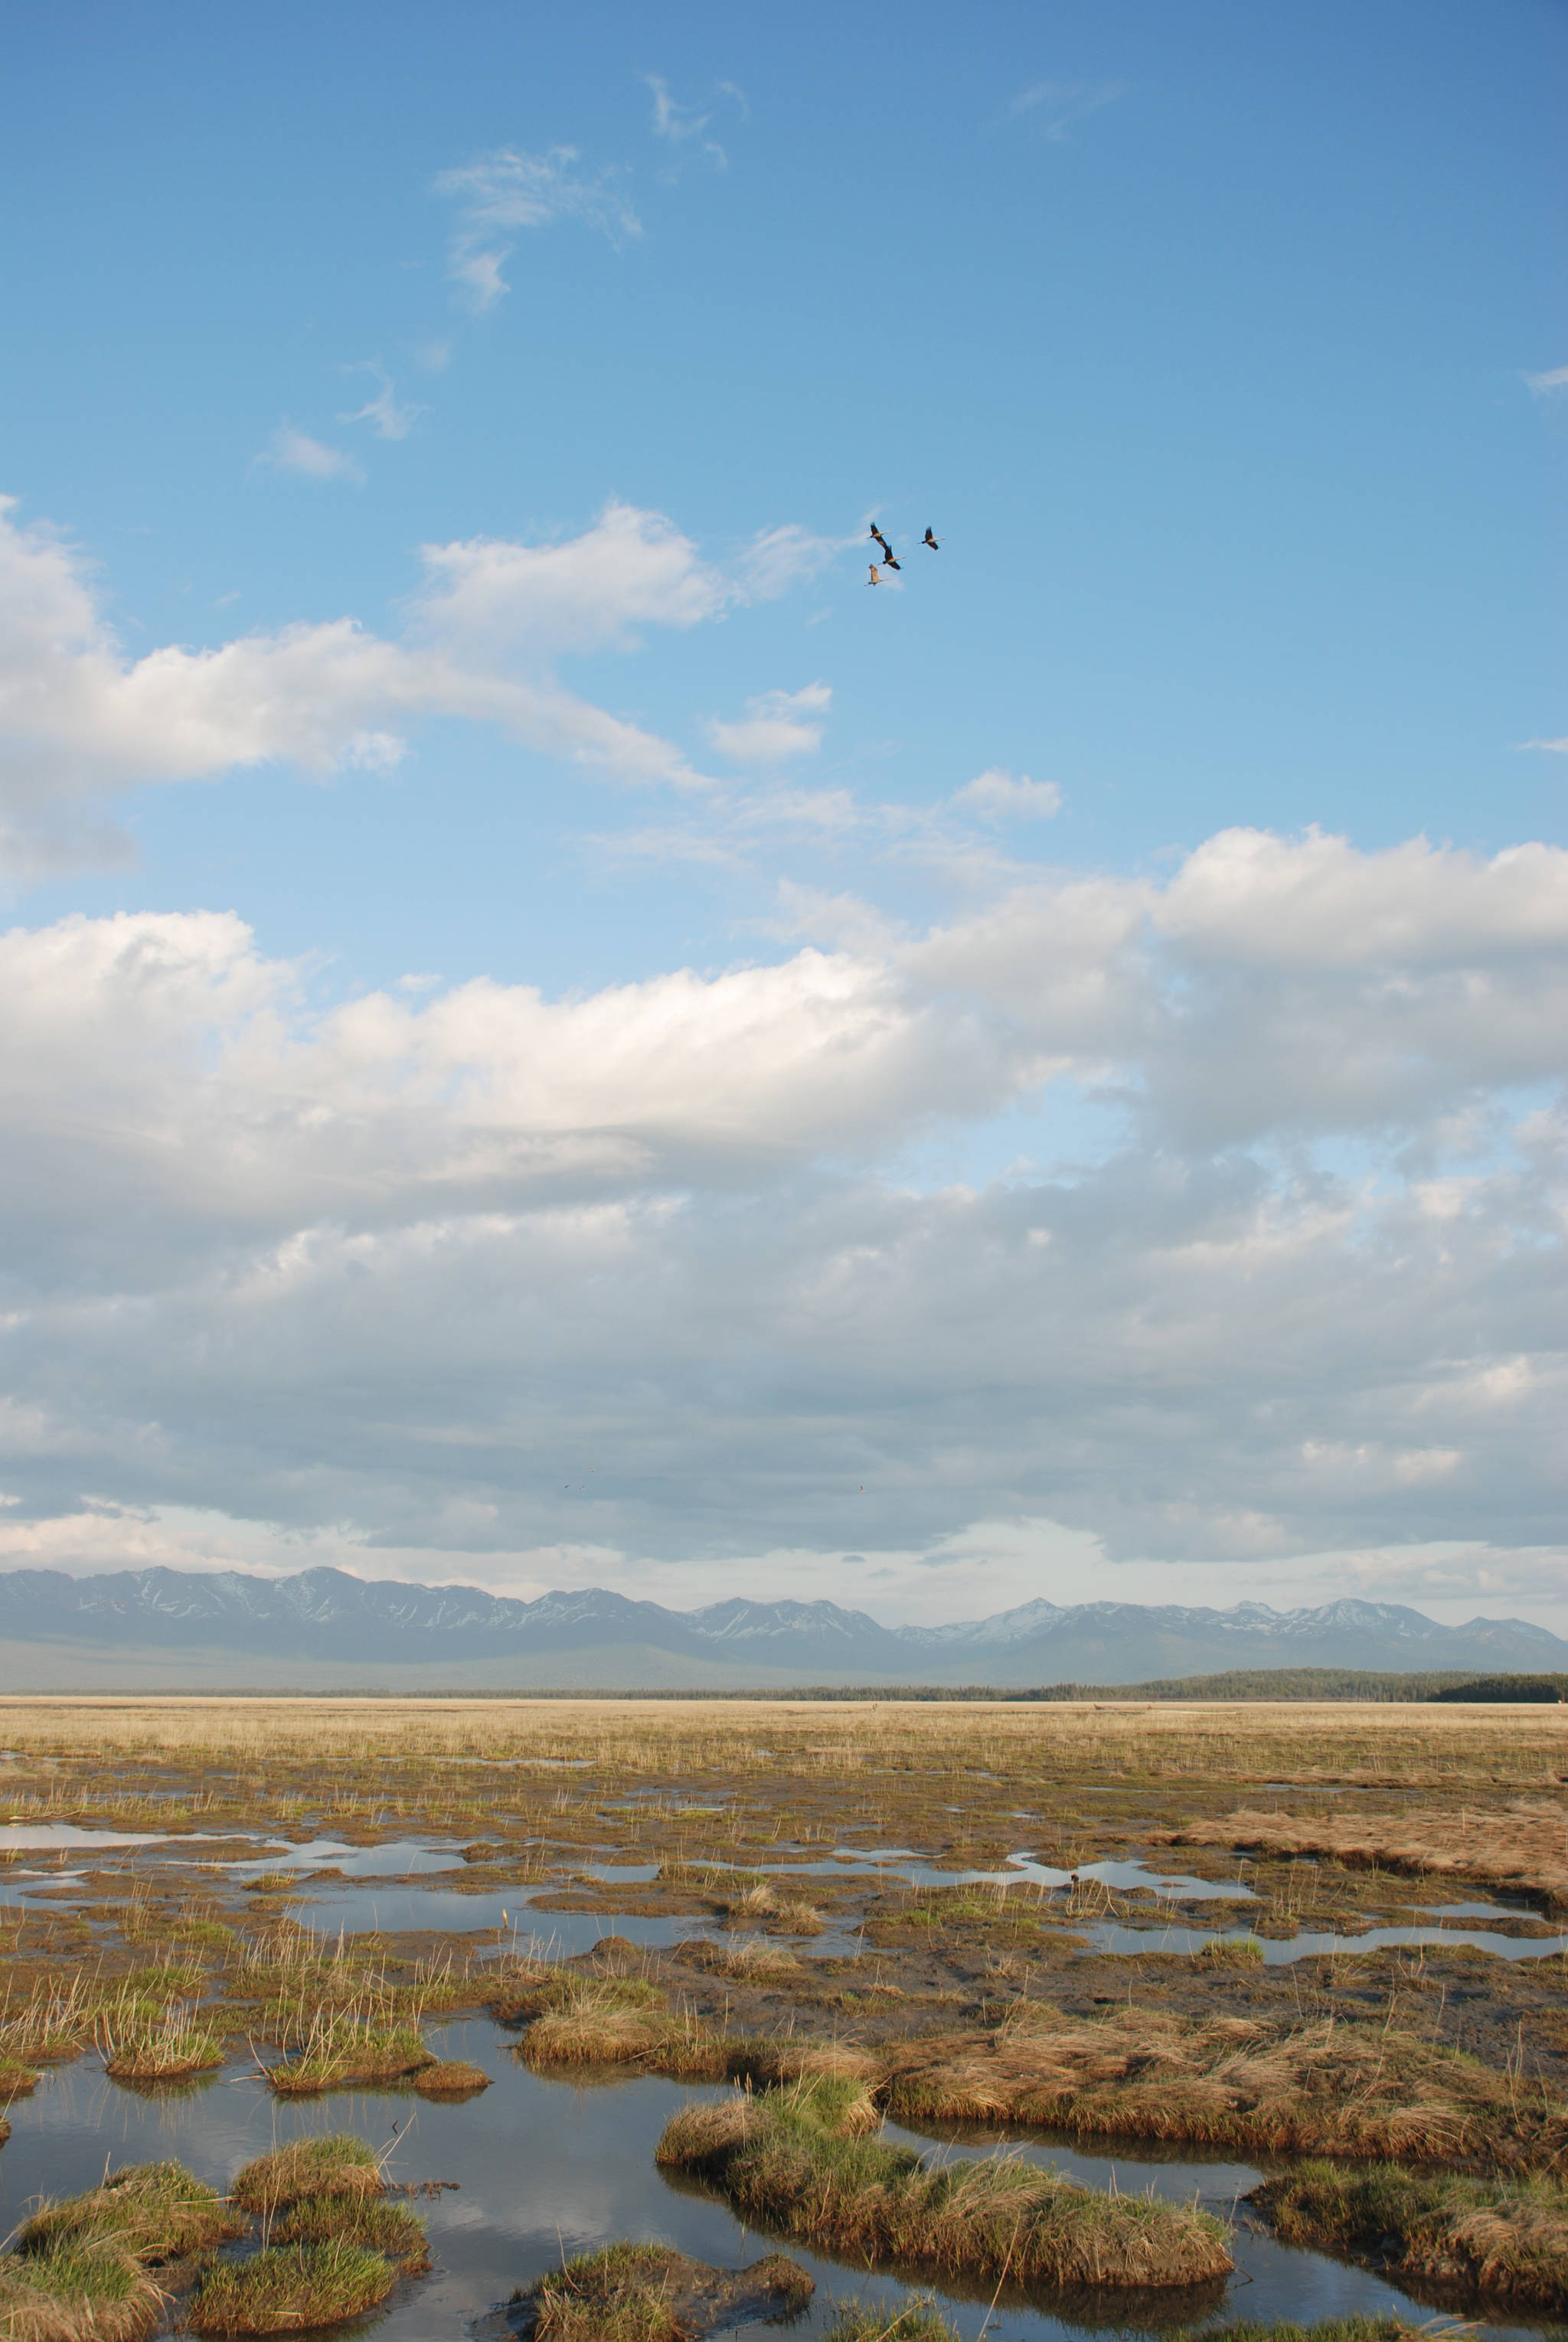 Sandhill cranes fly over salt-tolerant vegetation that is expanding on a slightly tilting but rising Chickaloon Flats decades after the 1964 Good Friday Earthquake. (Photo by John Morton/Kenai National Wildlife Refuge)